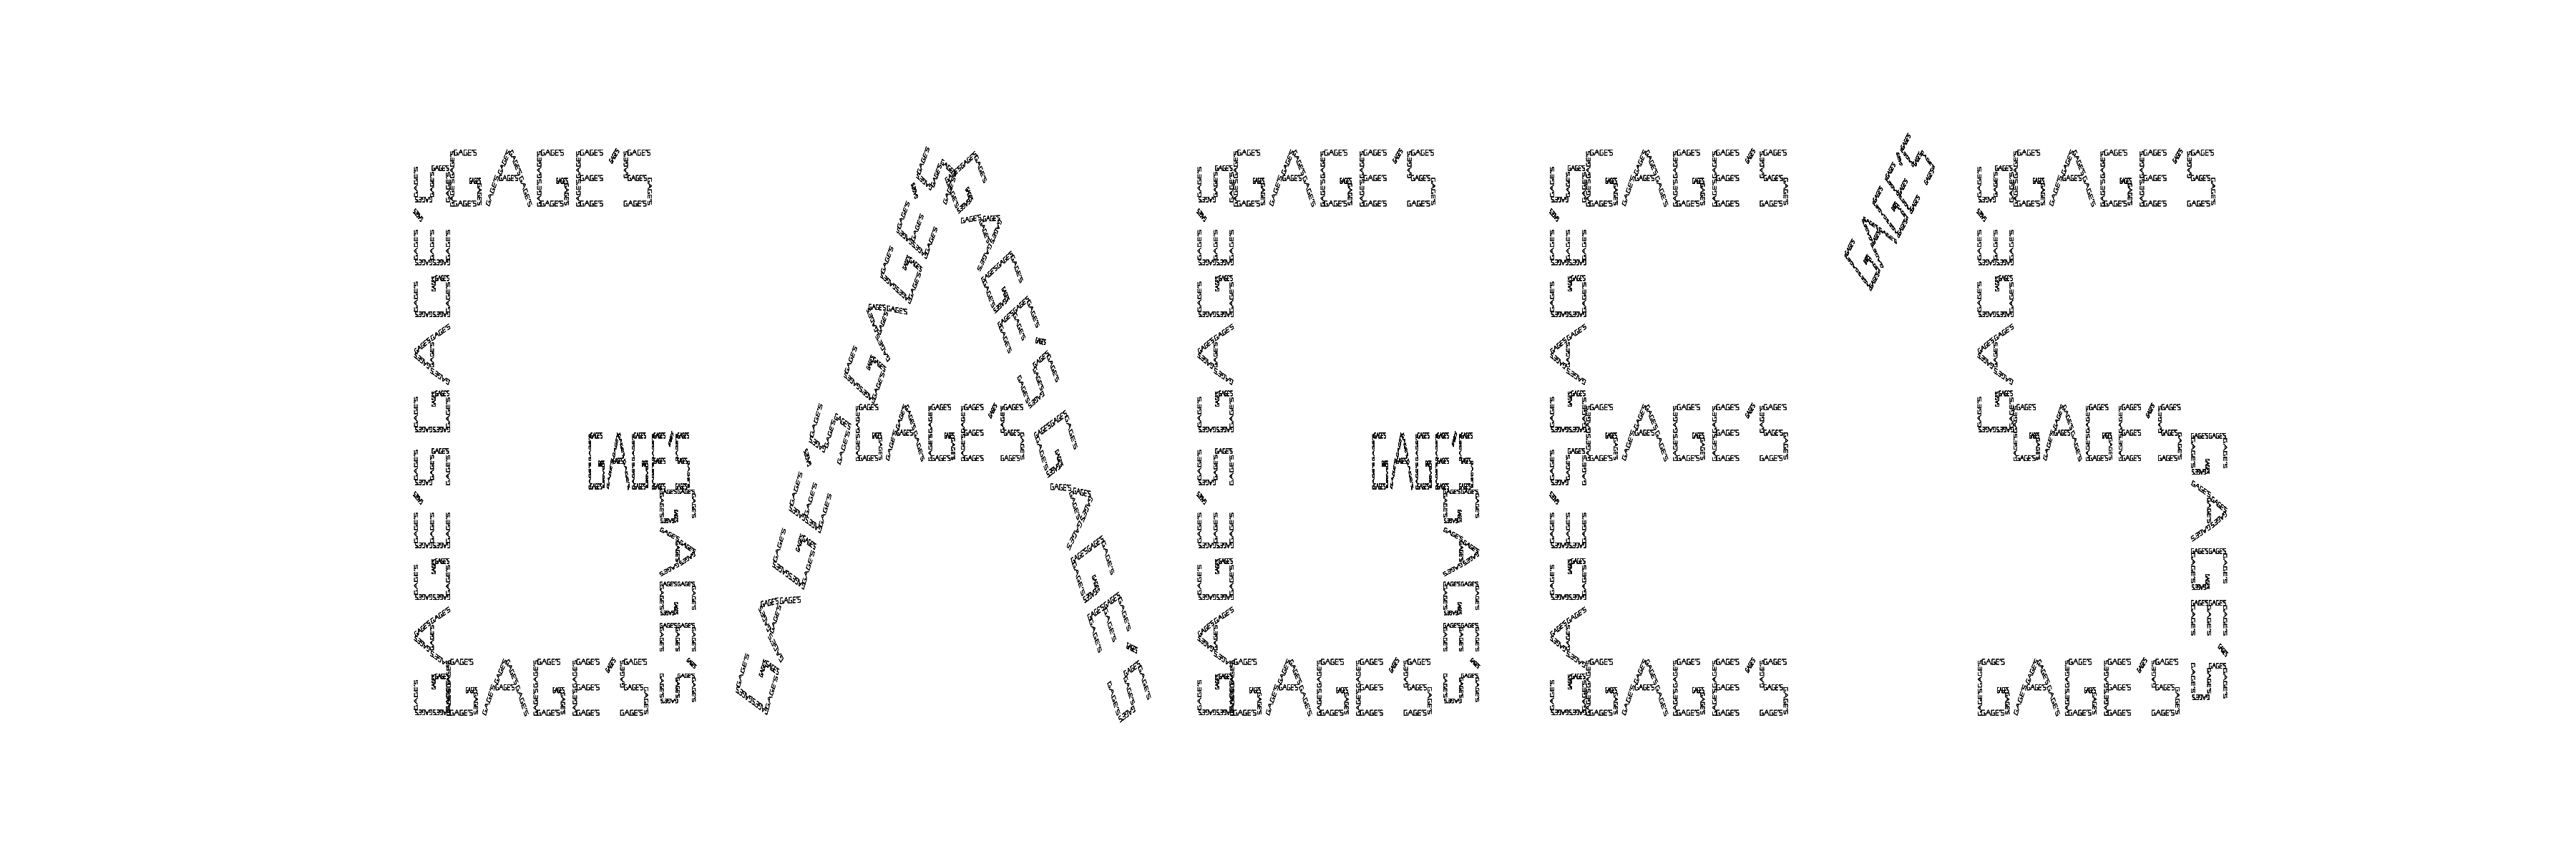 GAGES_word.png